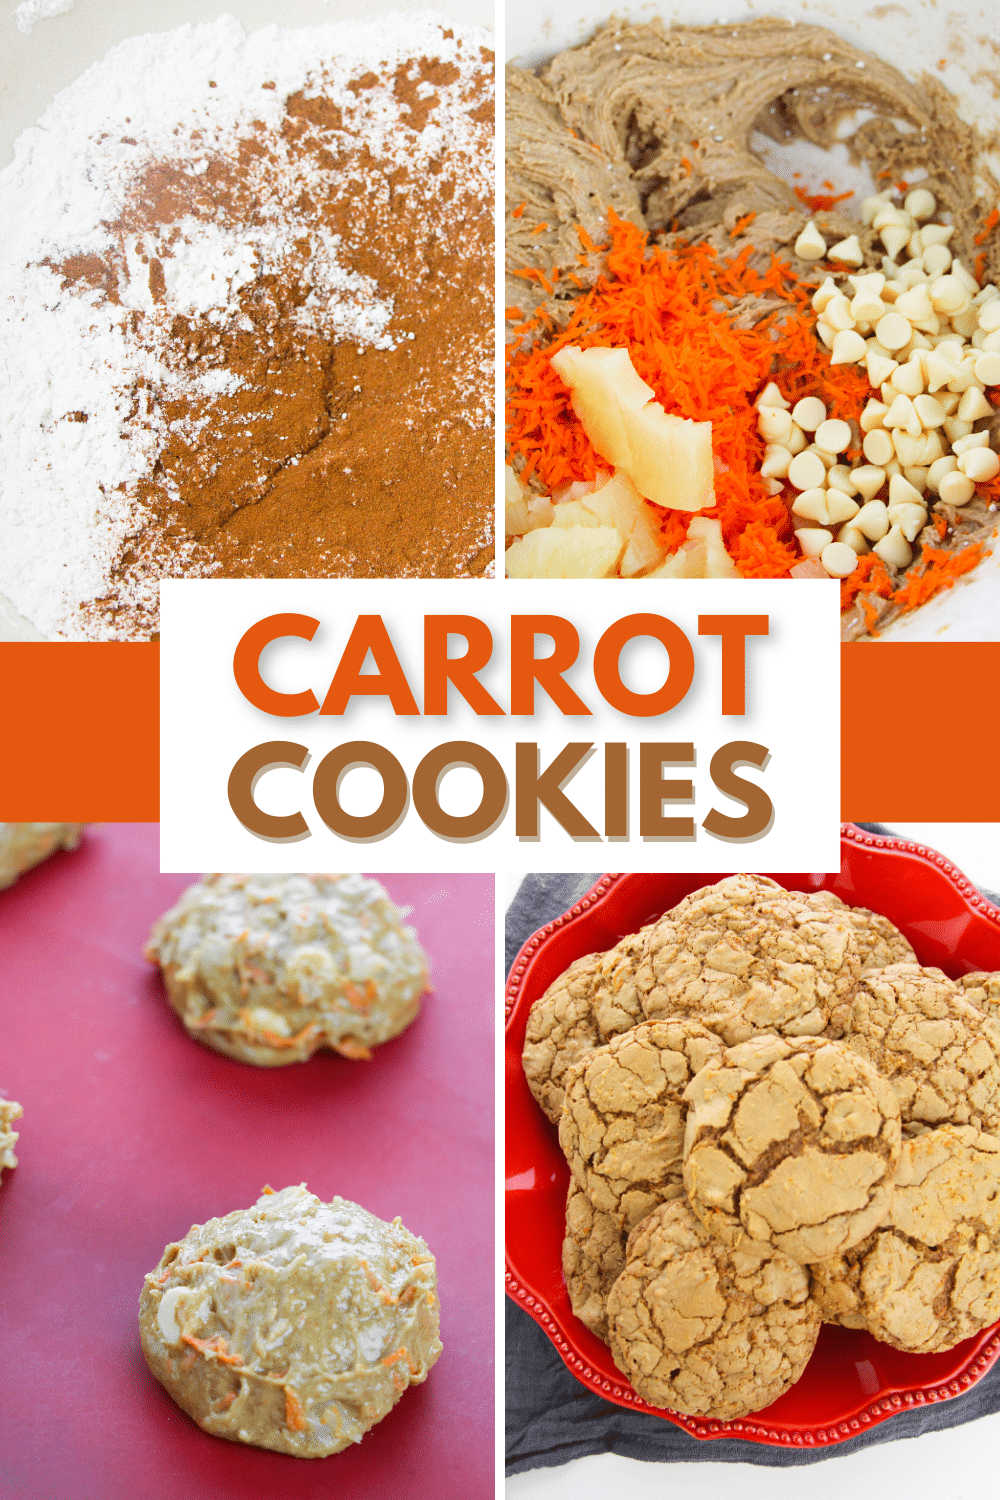 These Carrot Cookies are moist and flavorful, with a hint of cinnamon and nutmeg. They're a great festive treat for Easter. #carrotcookies #easterdessert #carrotcakecookies #cookierecipe #eastercookies via @wondermomwannab